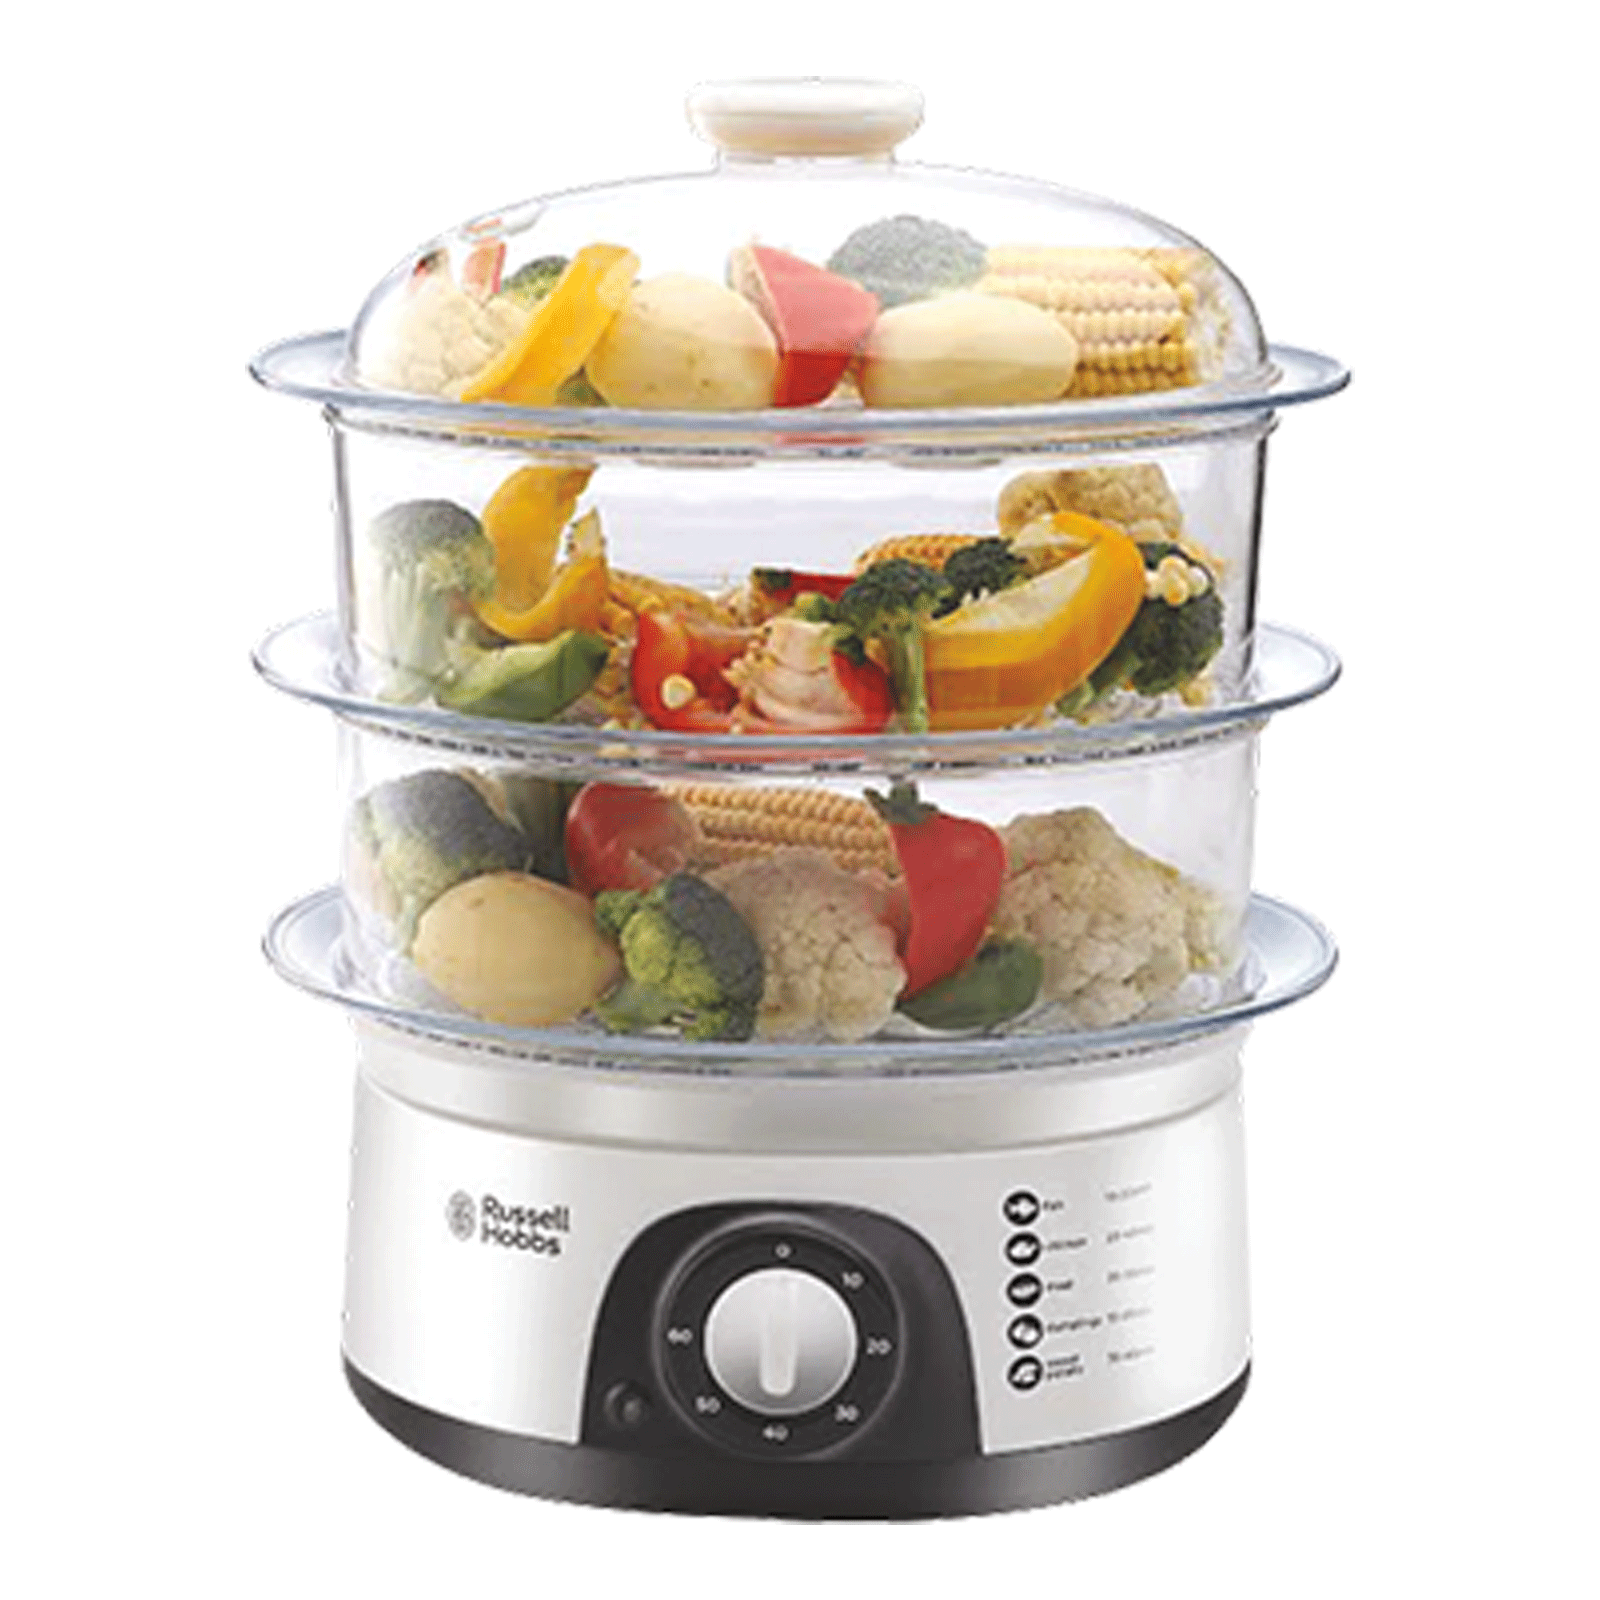 Russell Hobbs 9 Litre Electric Food Steamer (Transparent Lid, RFS800, White)_1